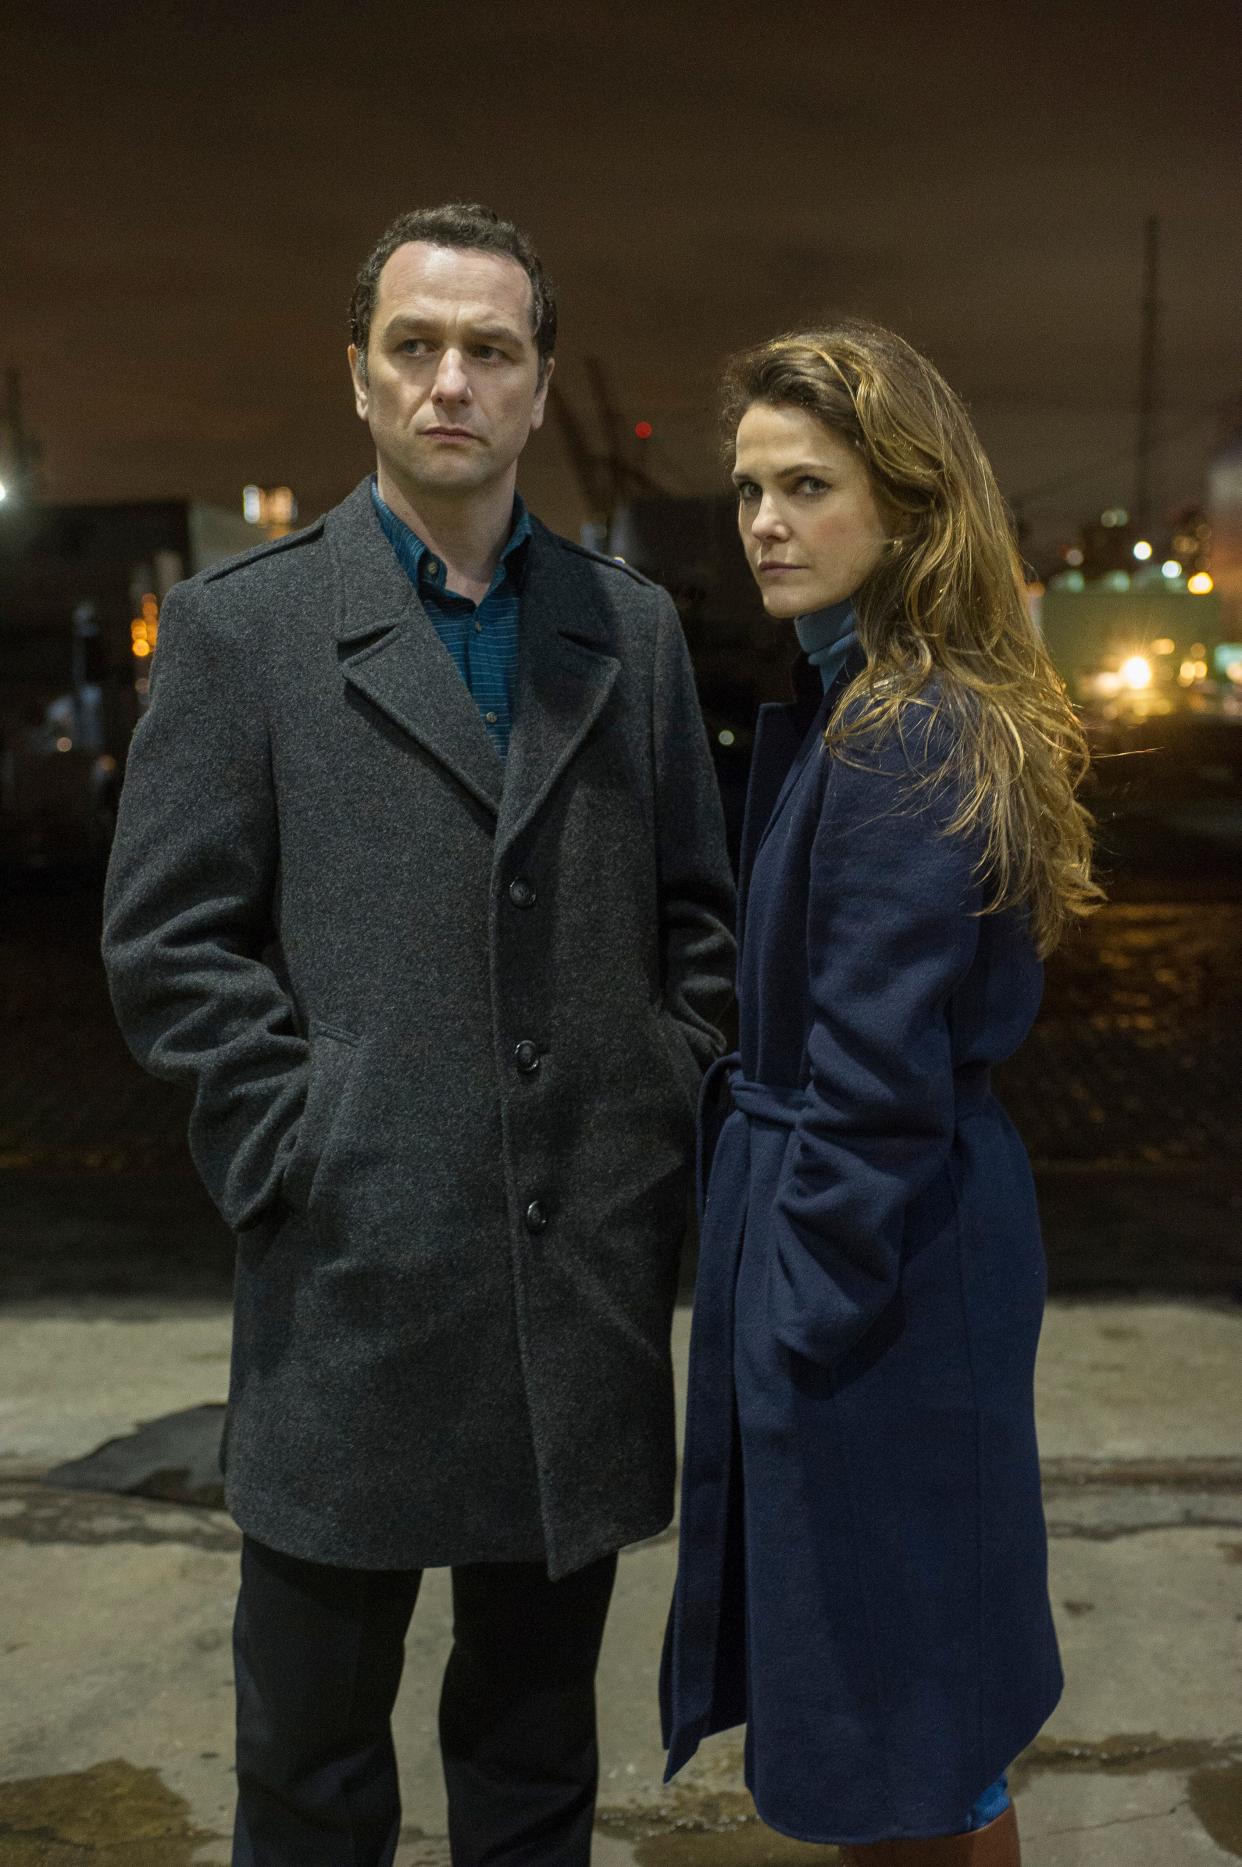 "The Americans" (FX) with Matthew Rhys and Keri Russell